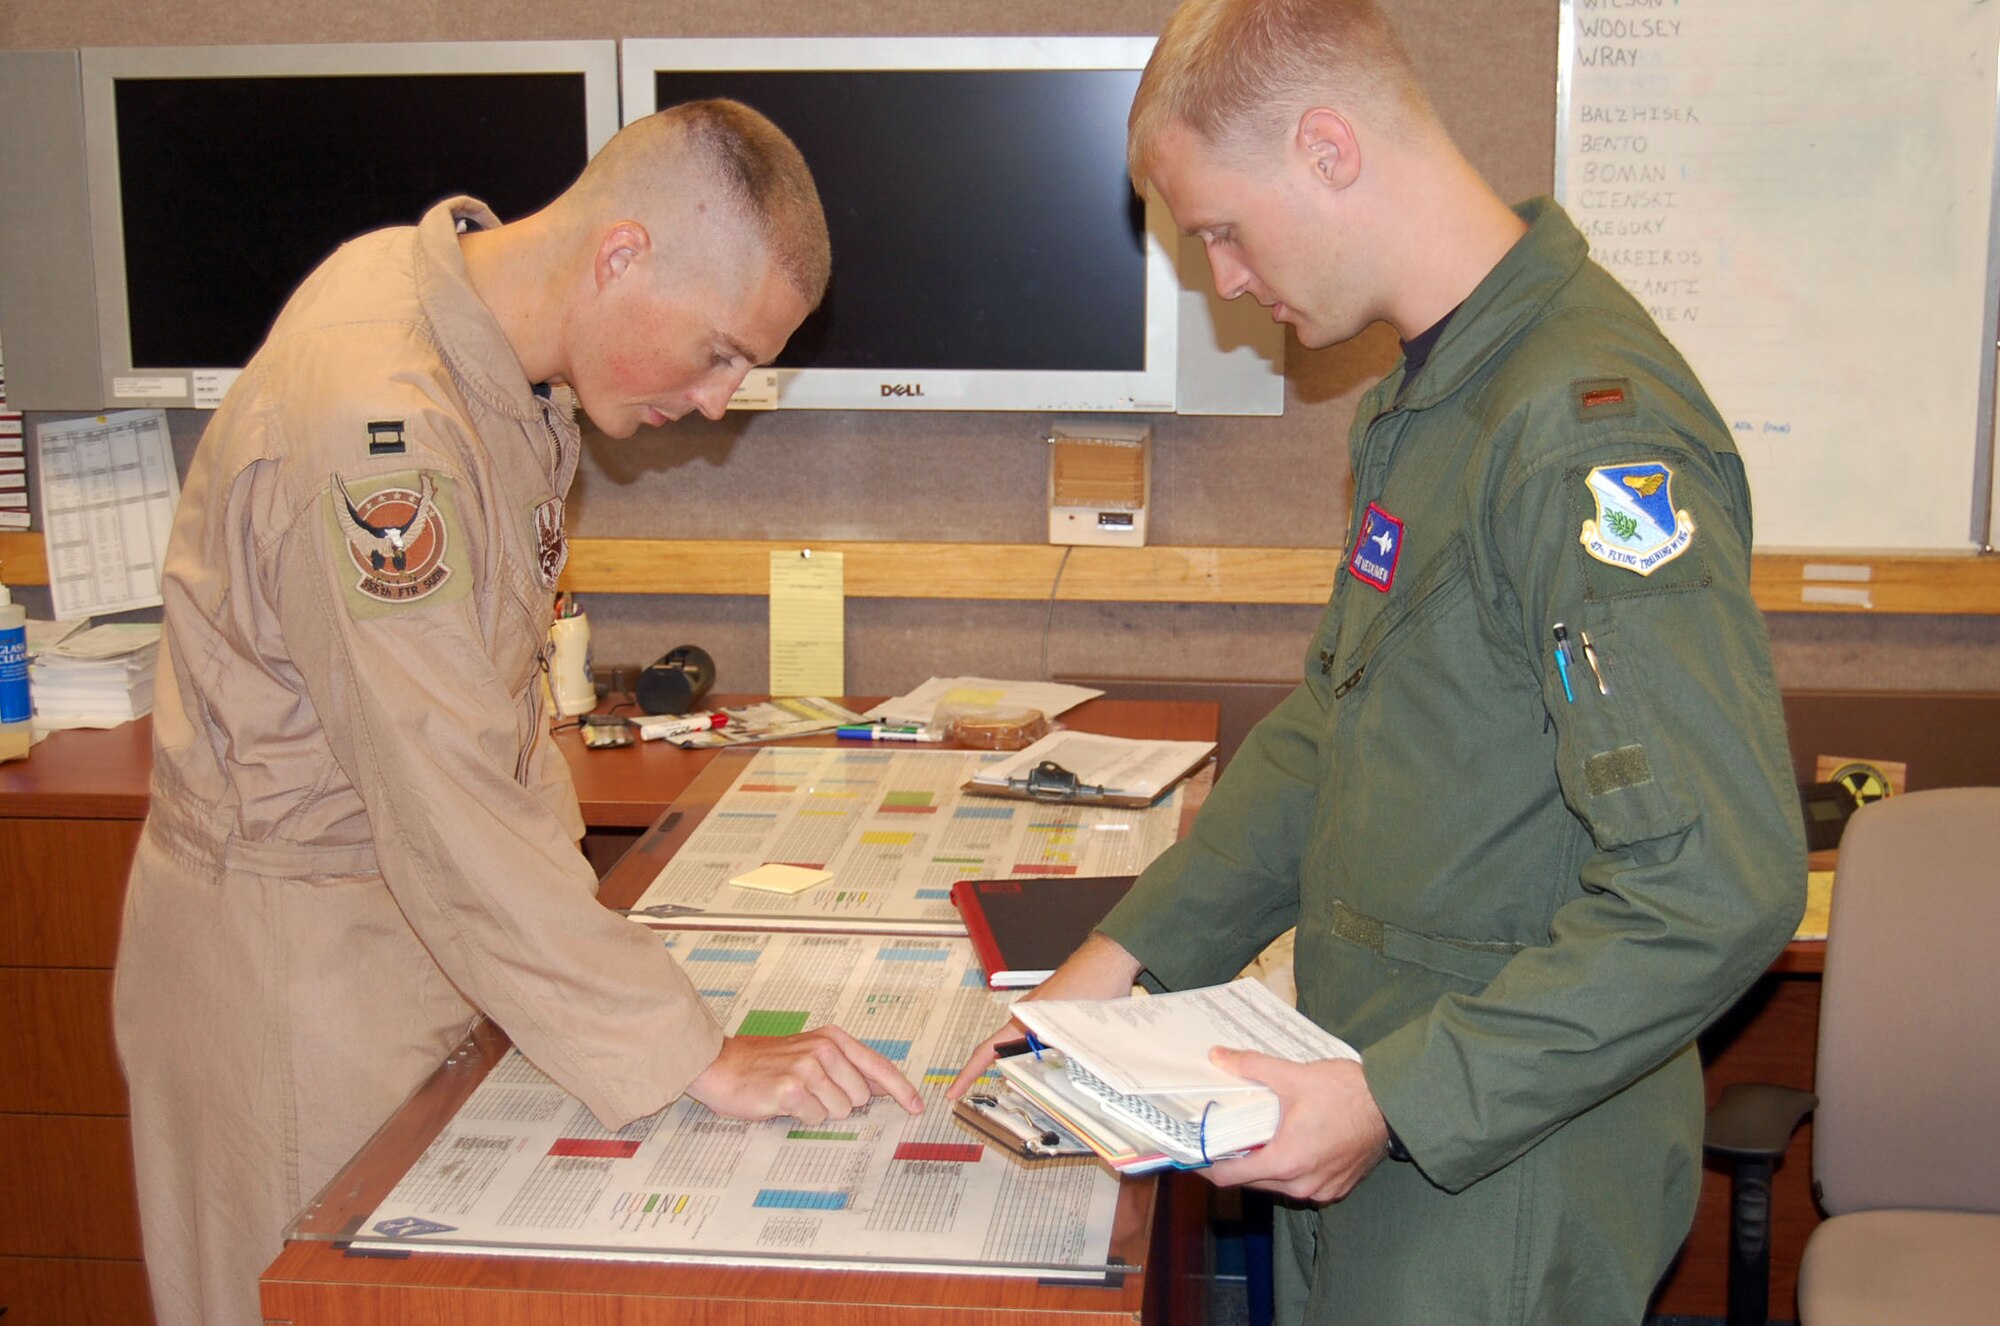 Laughlin Air Force Base, Texas – Capt. Joe Goldsworthy, 87th Flying Training Squadron’s N Flight commander, discusses upcoming sorties with 2nd Lt. Scott Meskimen, a student pilot in the 87th FTS. Hundreds of Laughlin Airmen wore desert uniforms on Sept. 11 to mark the significance of the day and the service and sacrifice they and their deployed brethren have and are making. Capt. Goldsworthy served two tours at Bagram AB, Afghanistan, as an A-10 Thunderbolt pilot. The “Warthog,” as the A-10 is affectionately known to the ground forces it supports so well, is one of the premier close air support aircraft in the U.S. arsenal. (U.S. Air Force Photo/Tech. Sgt. Joel Langton)  